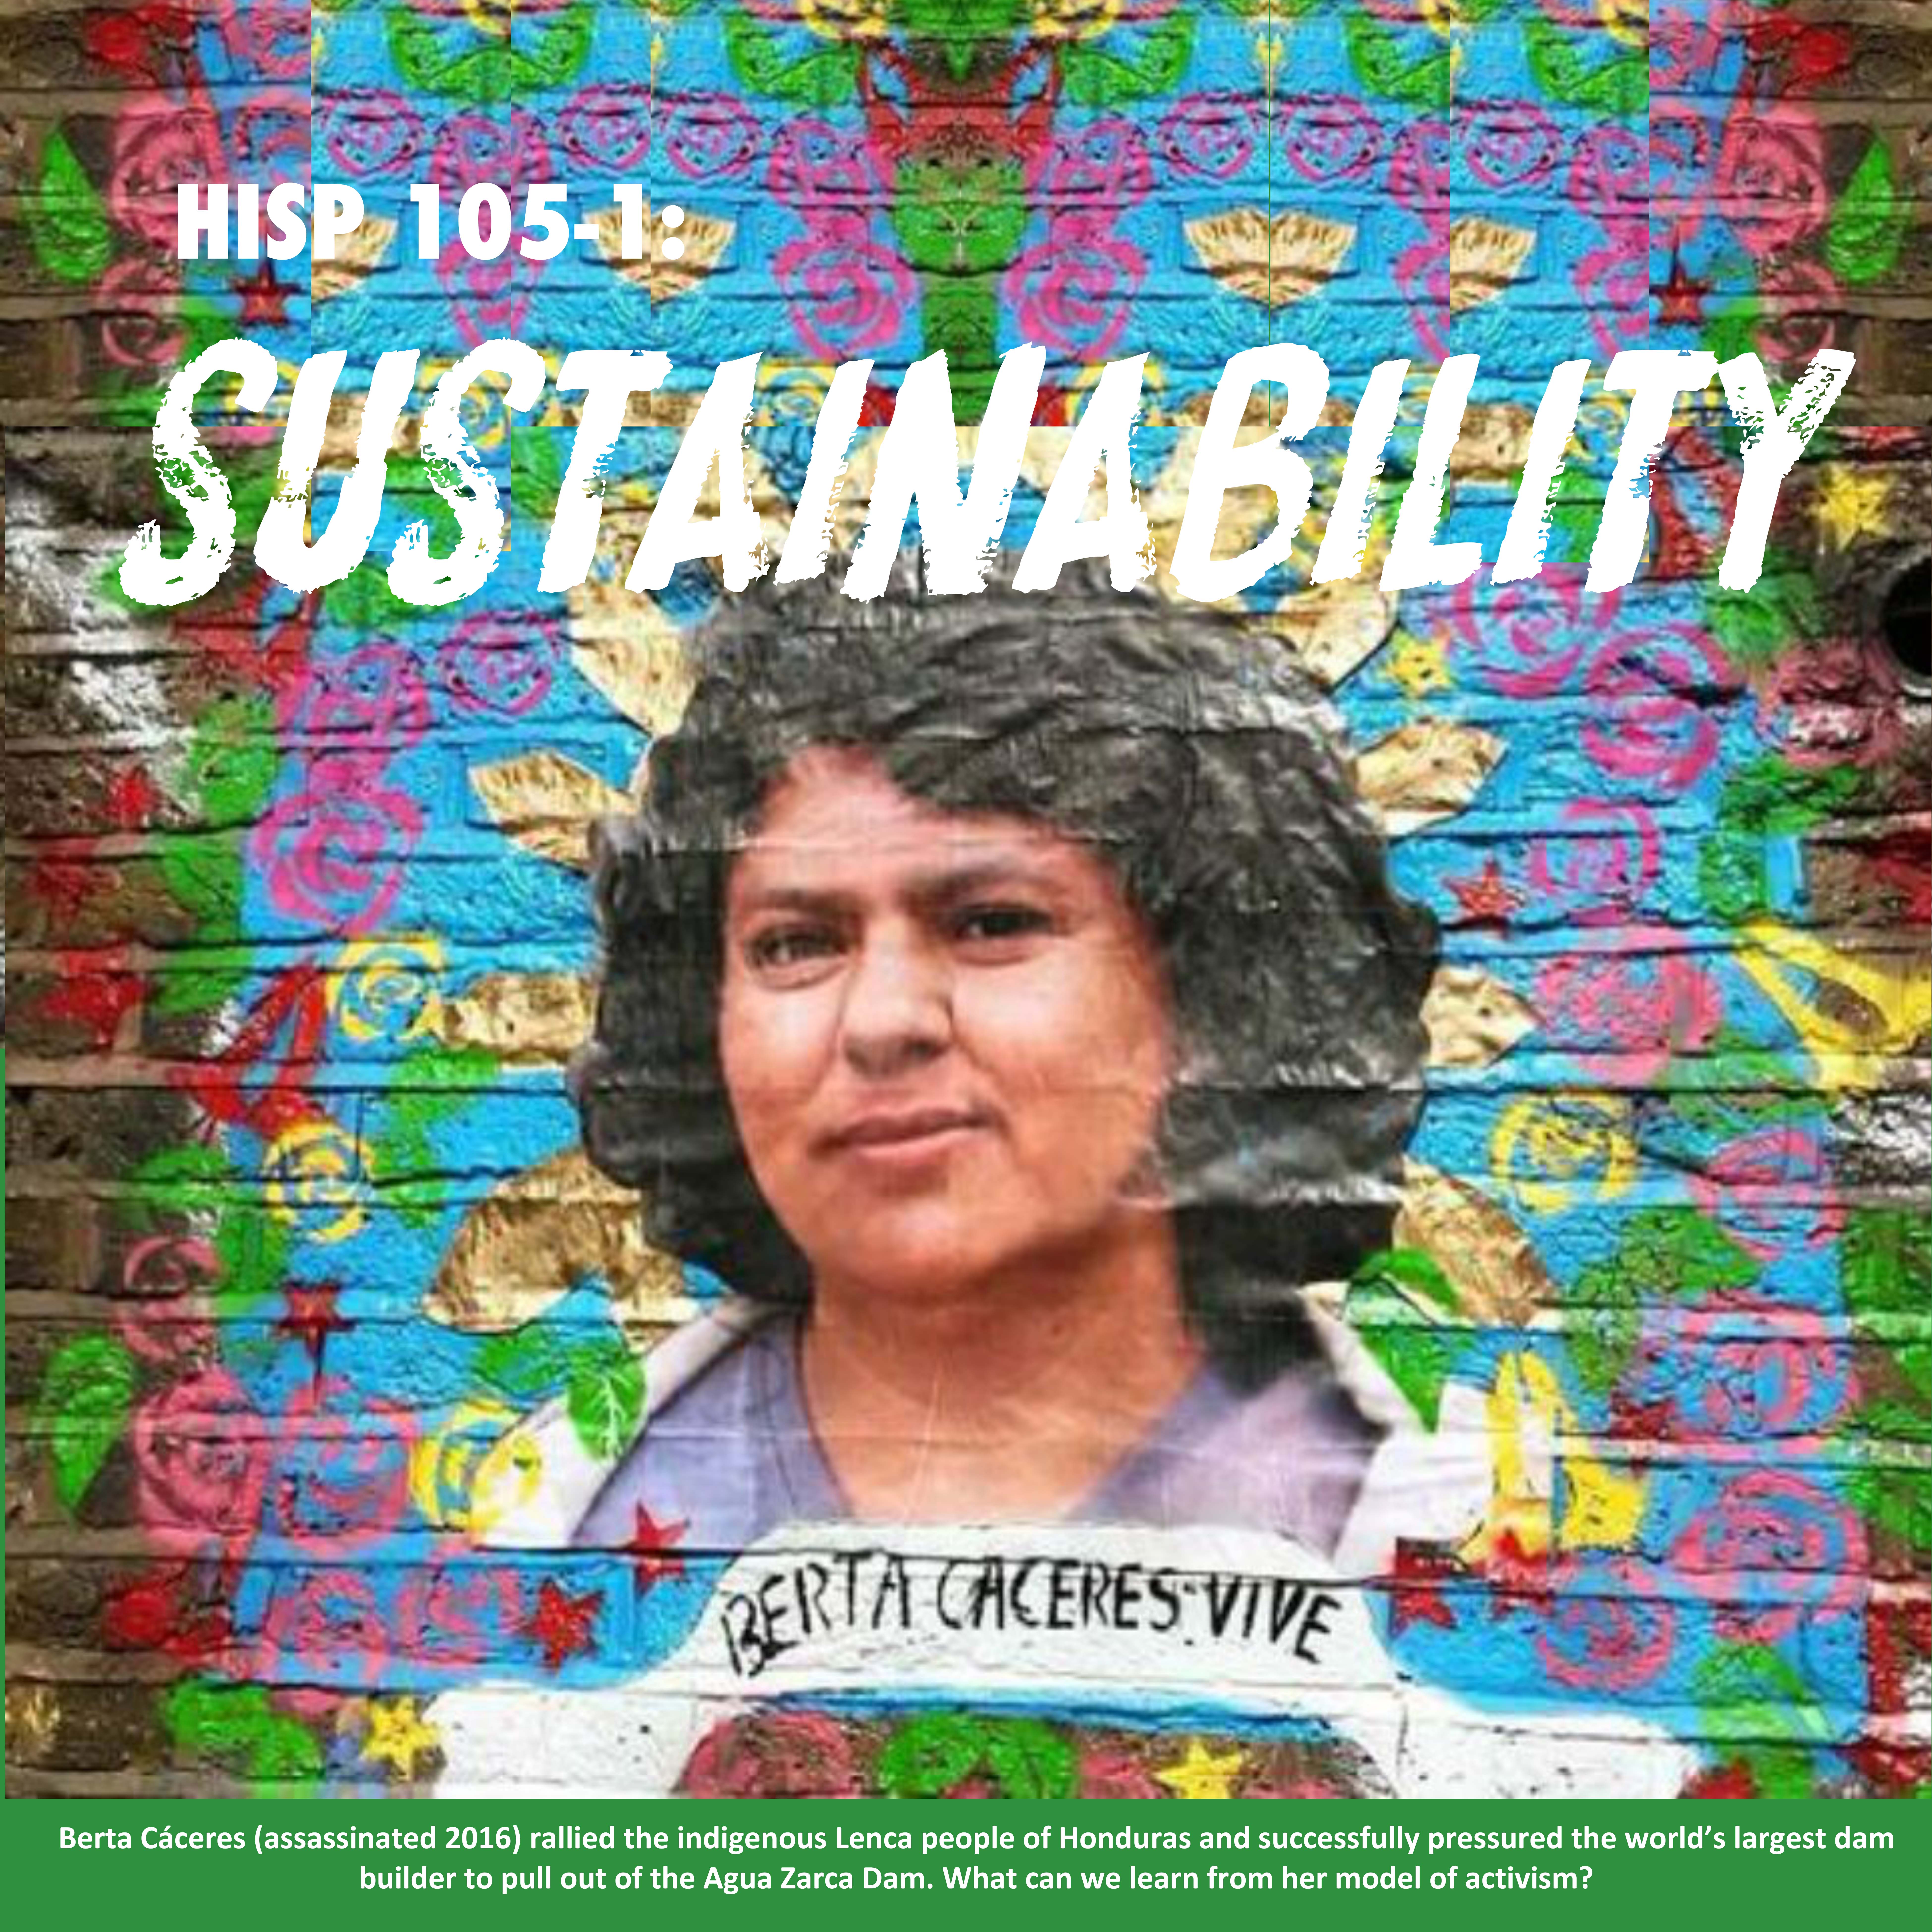 HISP 105-1: Sustainability. Portrait of Berta Cáceres, painted on a brick wall with Berta Caceres vive written below.  The caption reads (assassinated 2016) rallied the indigenous Lenca people of Honduras and successfully pressured the world’s largest dam builder to pull out of the Agua Zarca Dam. What can we learn from her model of activism?  Oral Communication through Cultural Topics